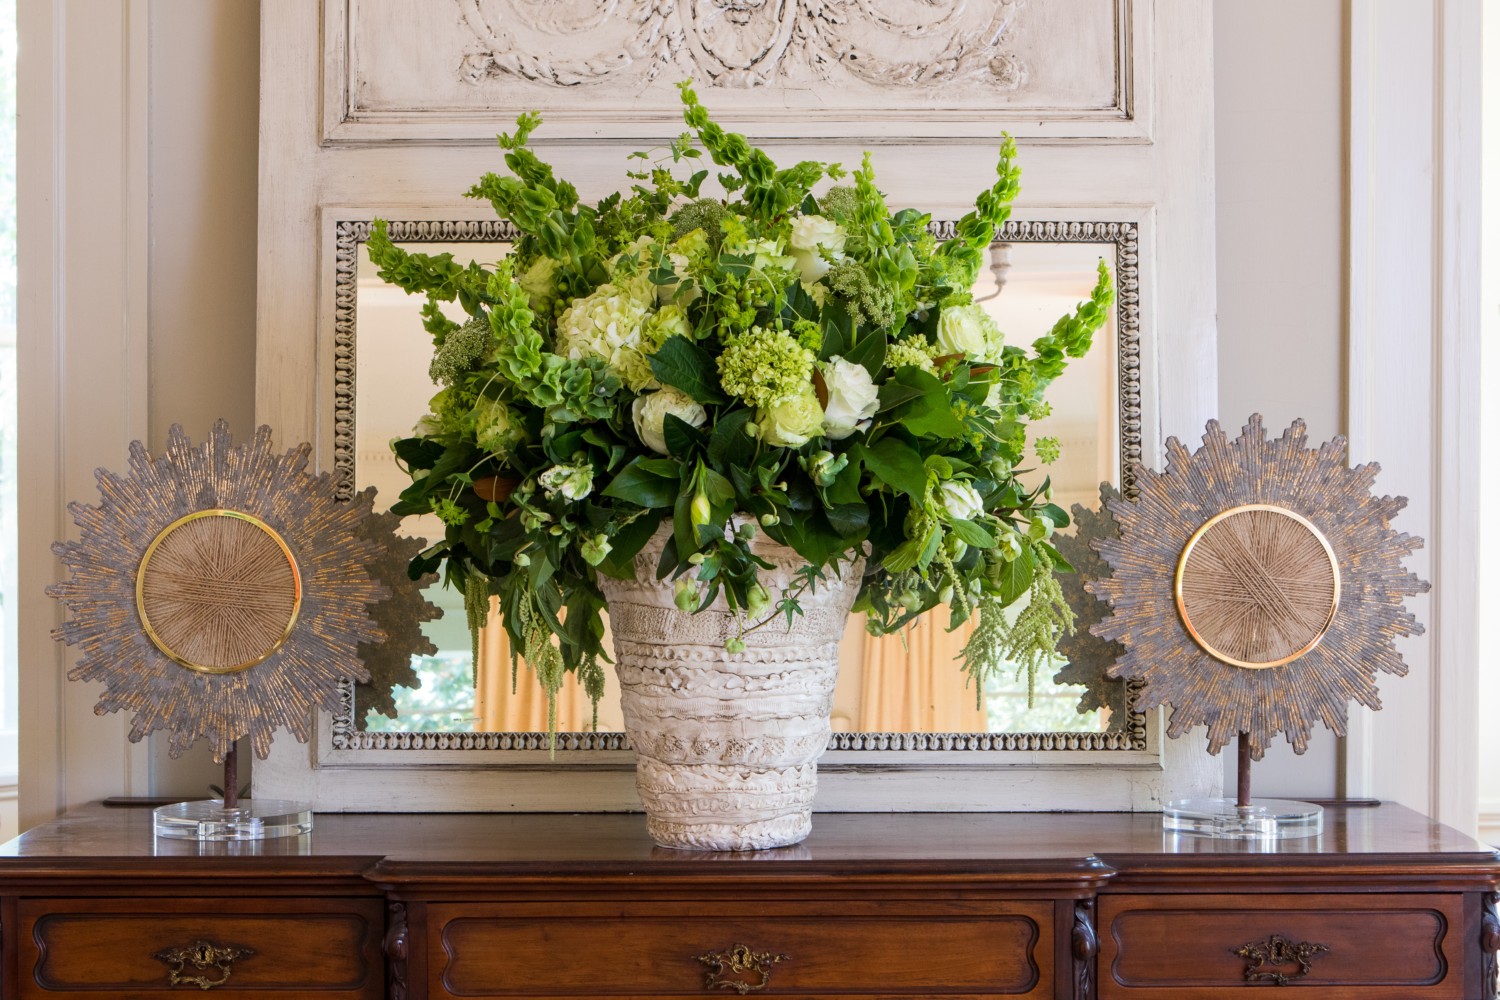 New Orleans floral designer Margaret Ludwig of Giverny Design creates a monochromatic green arrangement in the French style.